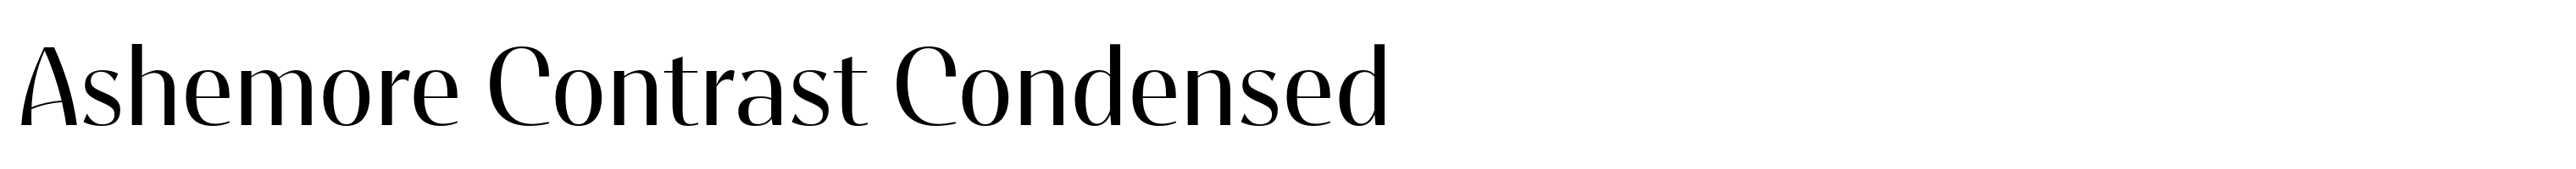 Ashemore Contrast Condensed